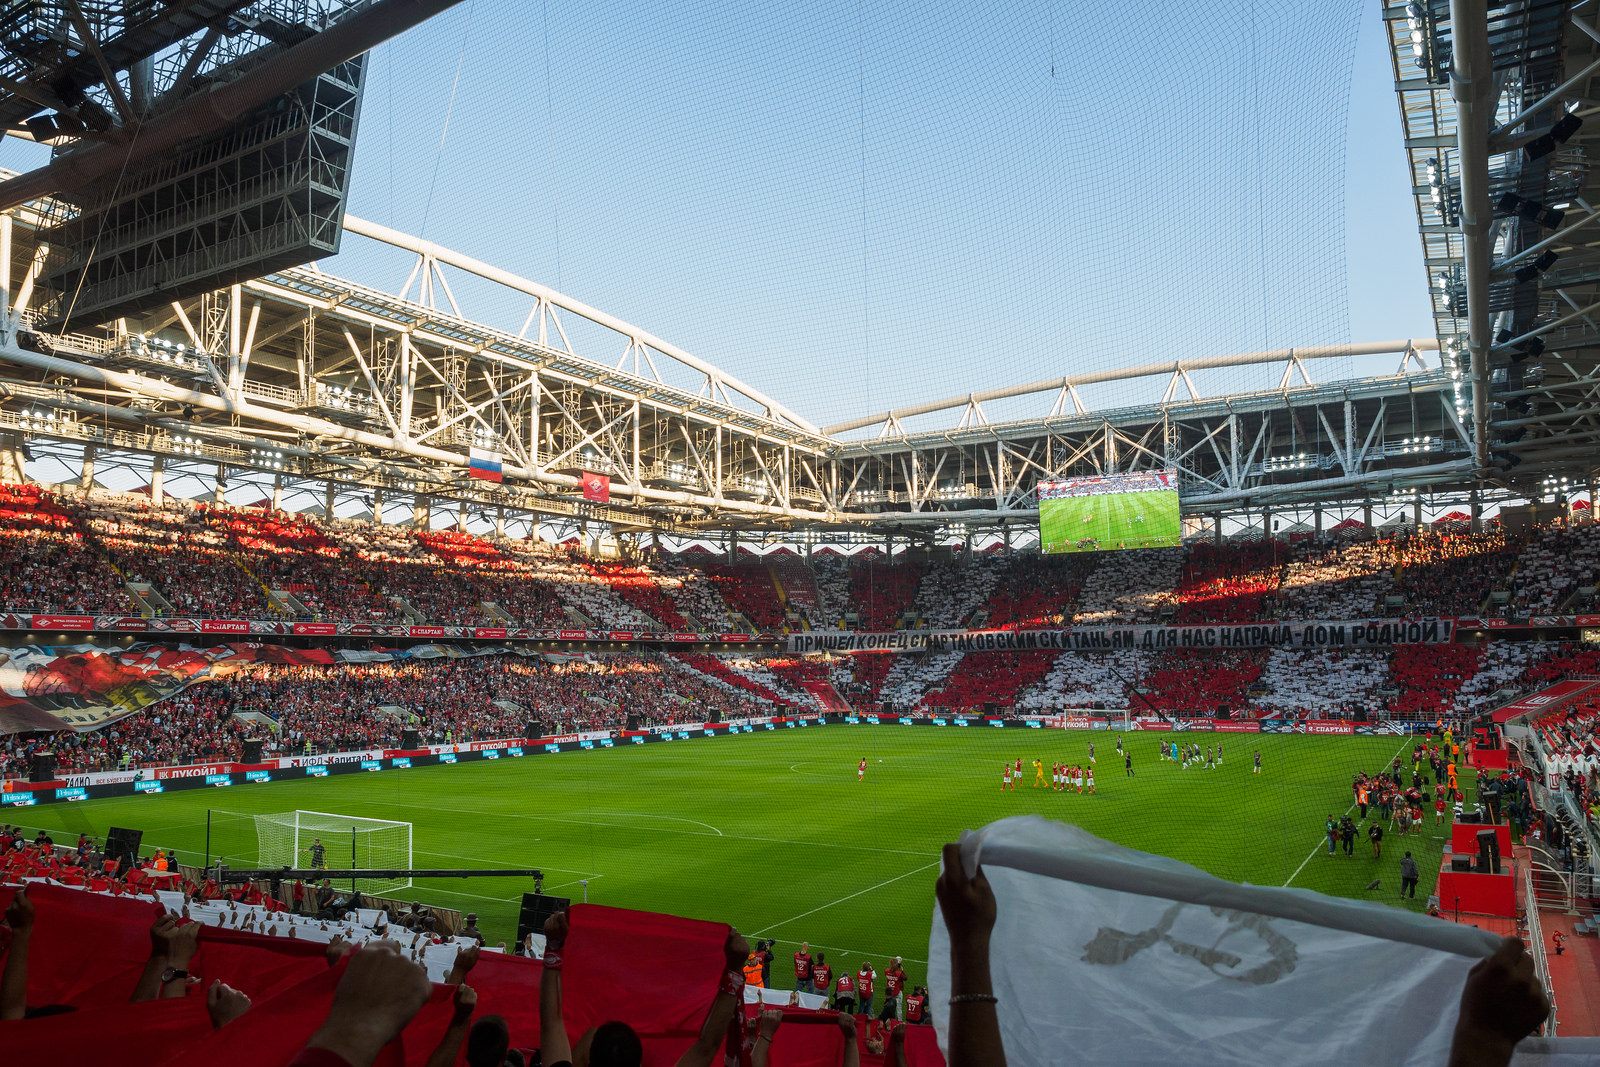 Moscow: Otkritie Arena will never pay for itself –